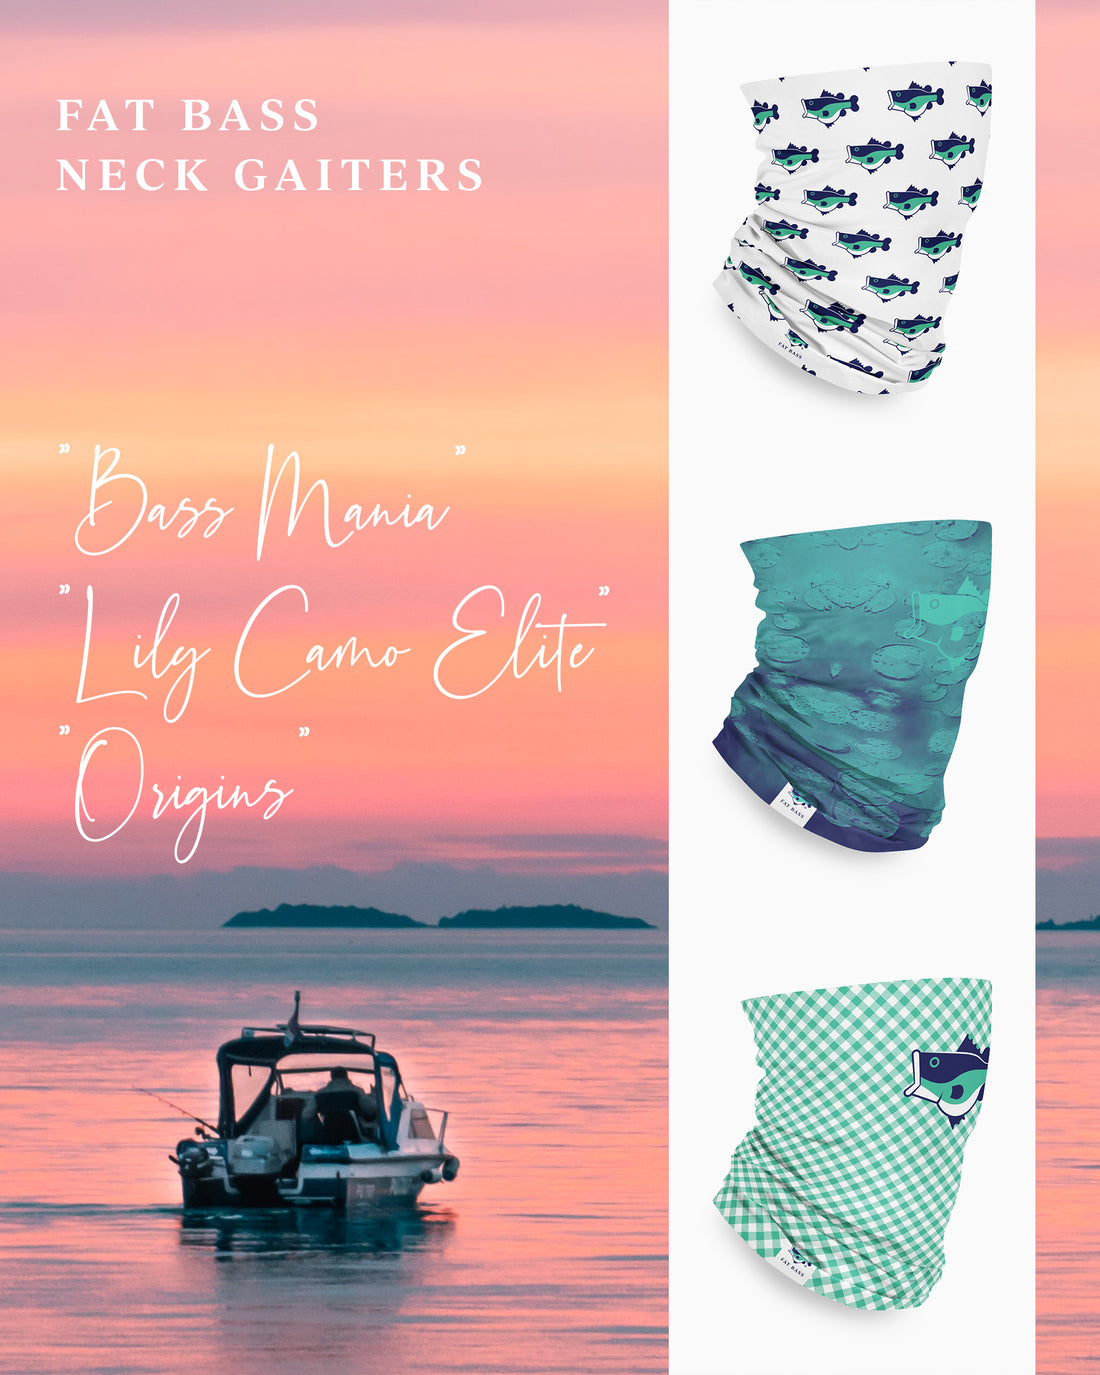 New Fat Bass Neck Gaiters now AVAILABLE for purchase!